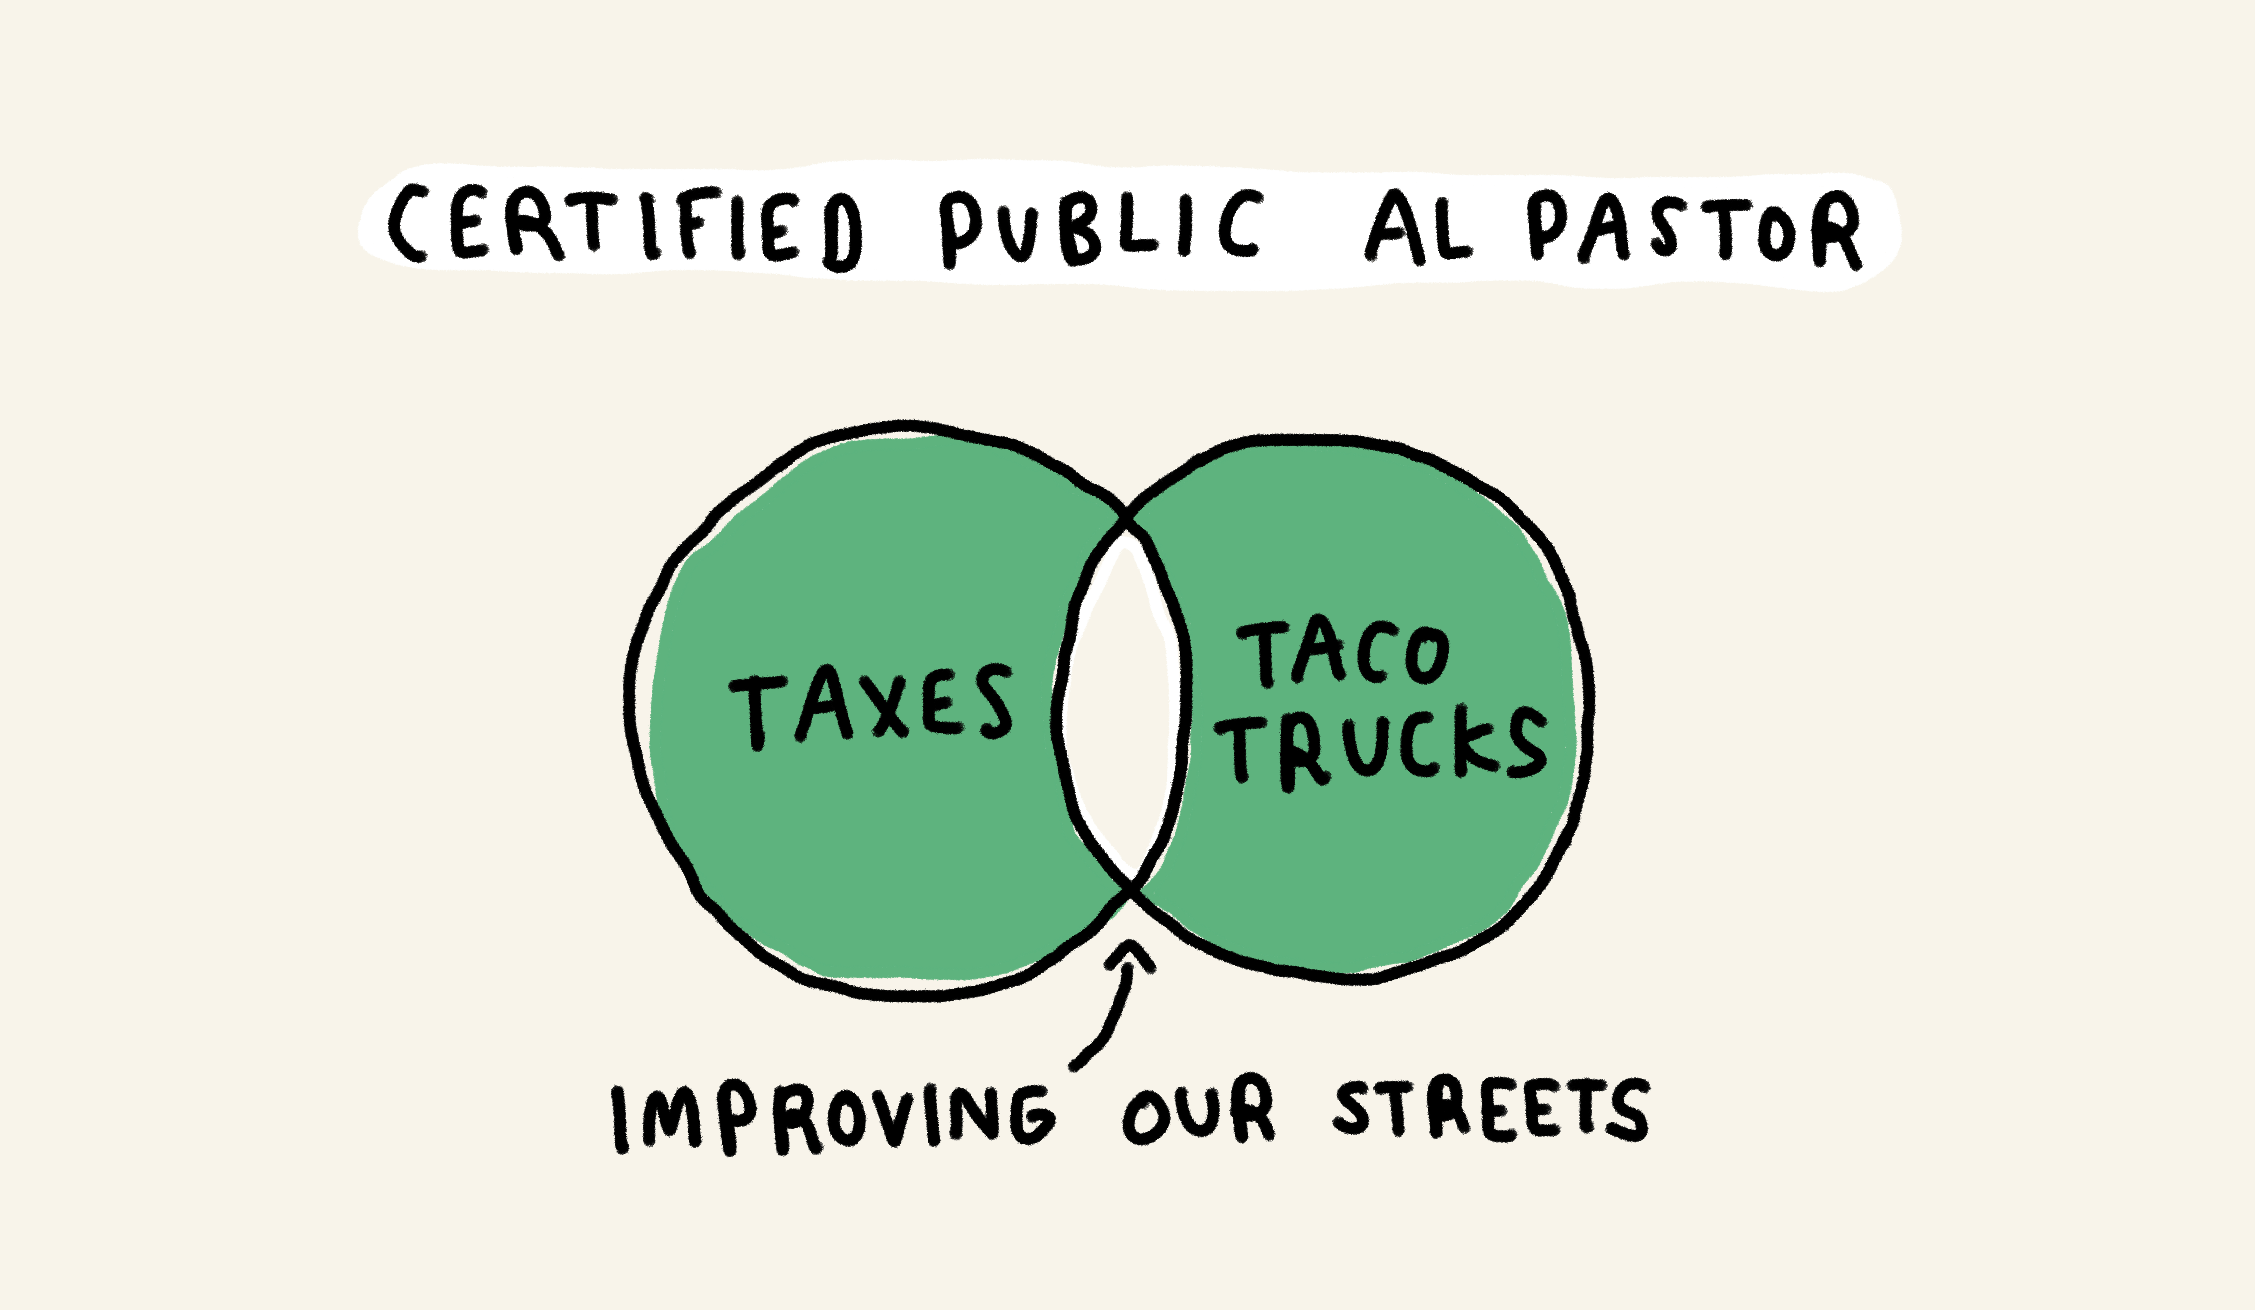 Certified public al pastor

Taxes + taco trucks = improving our streets